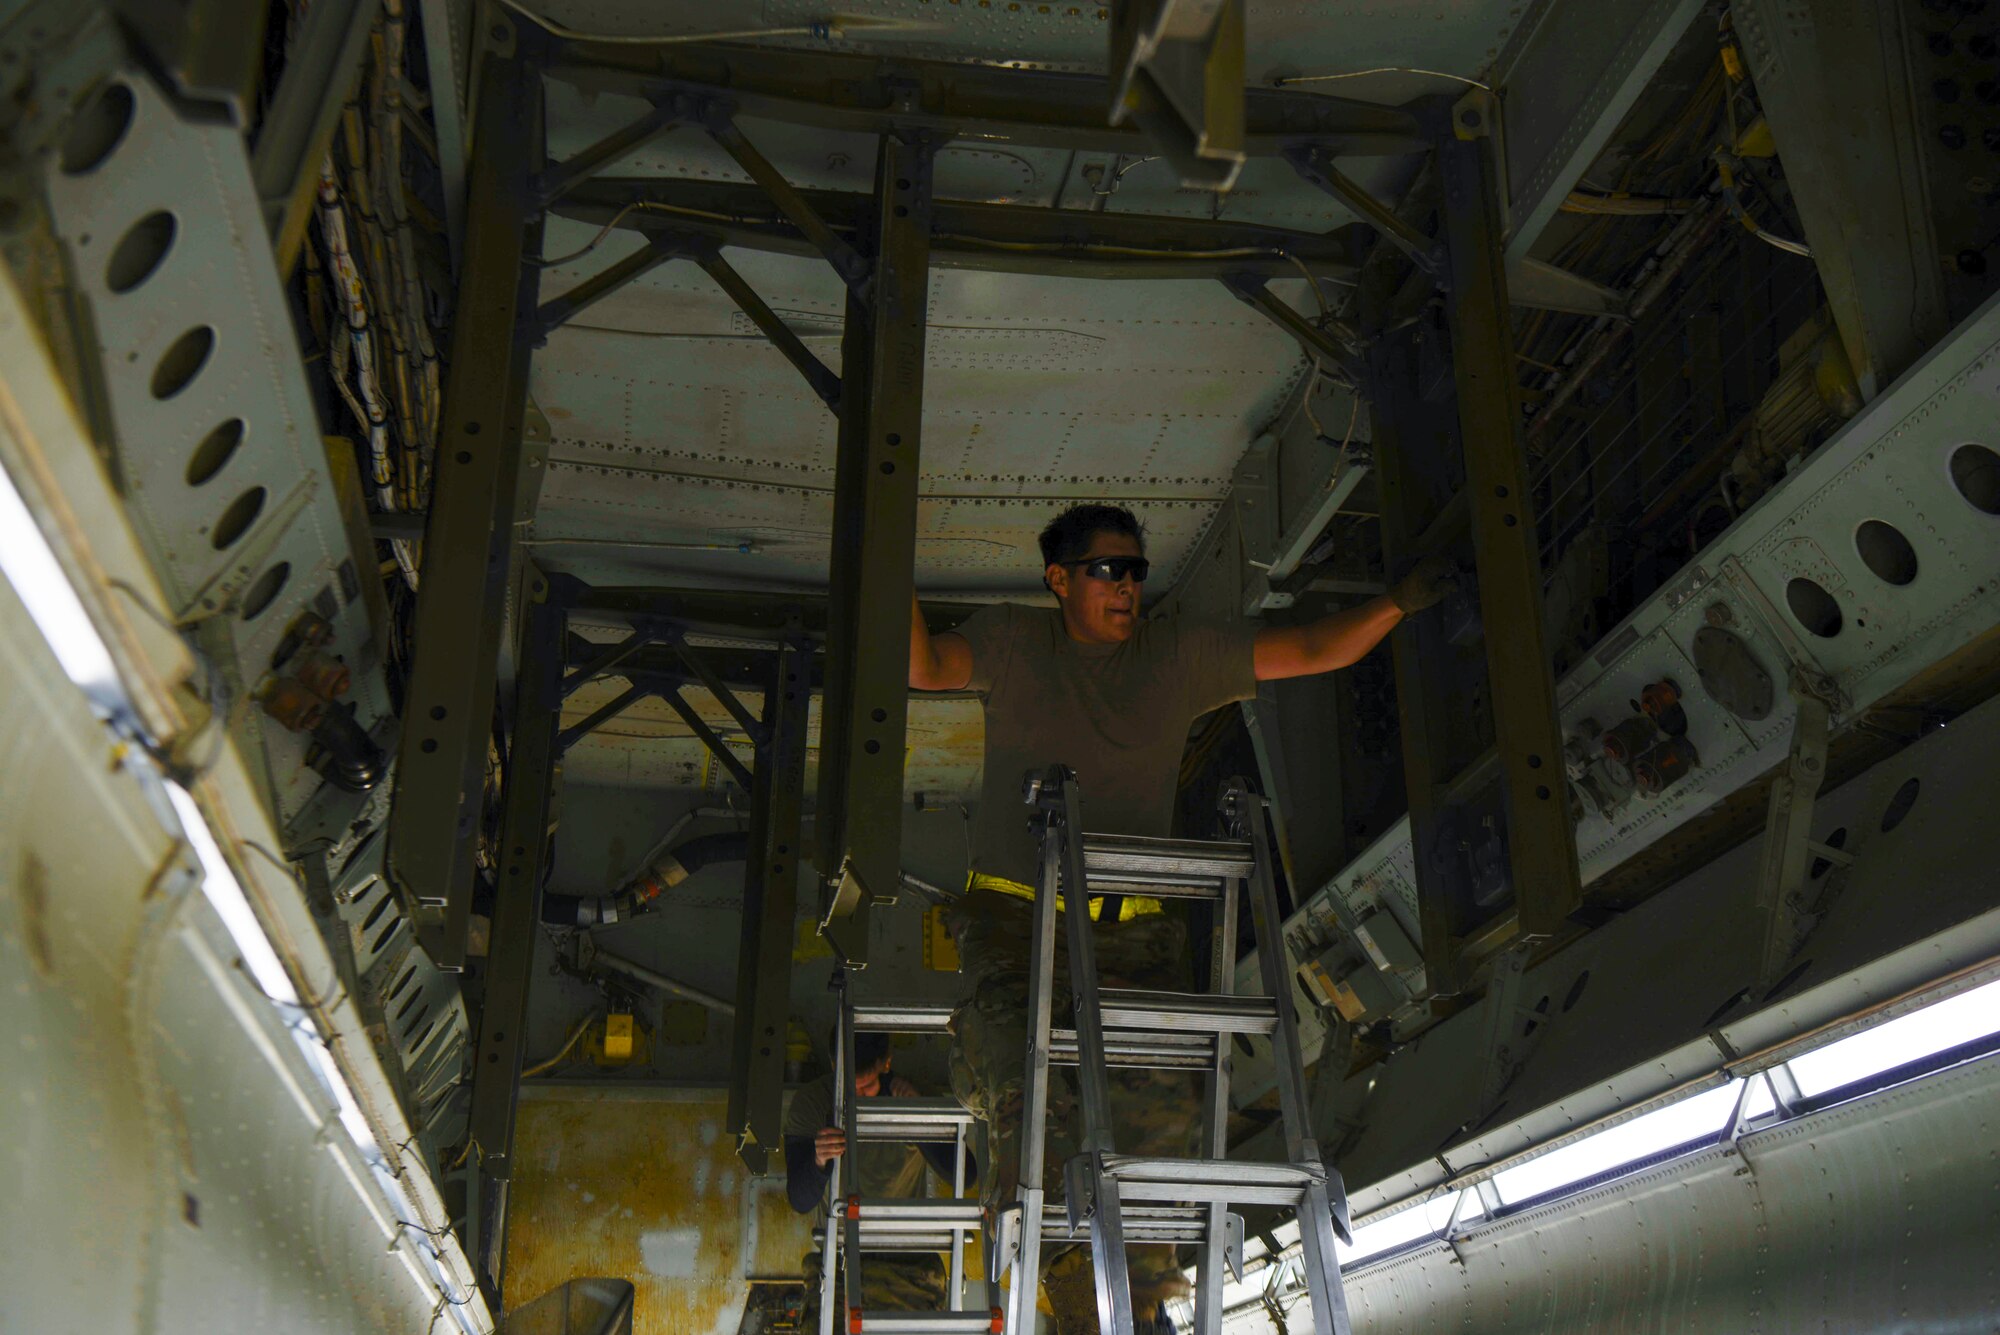 airmen perform operational checks in the bomb bay